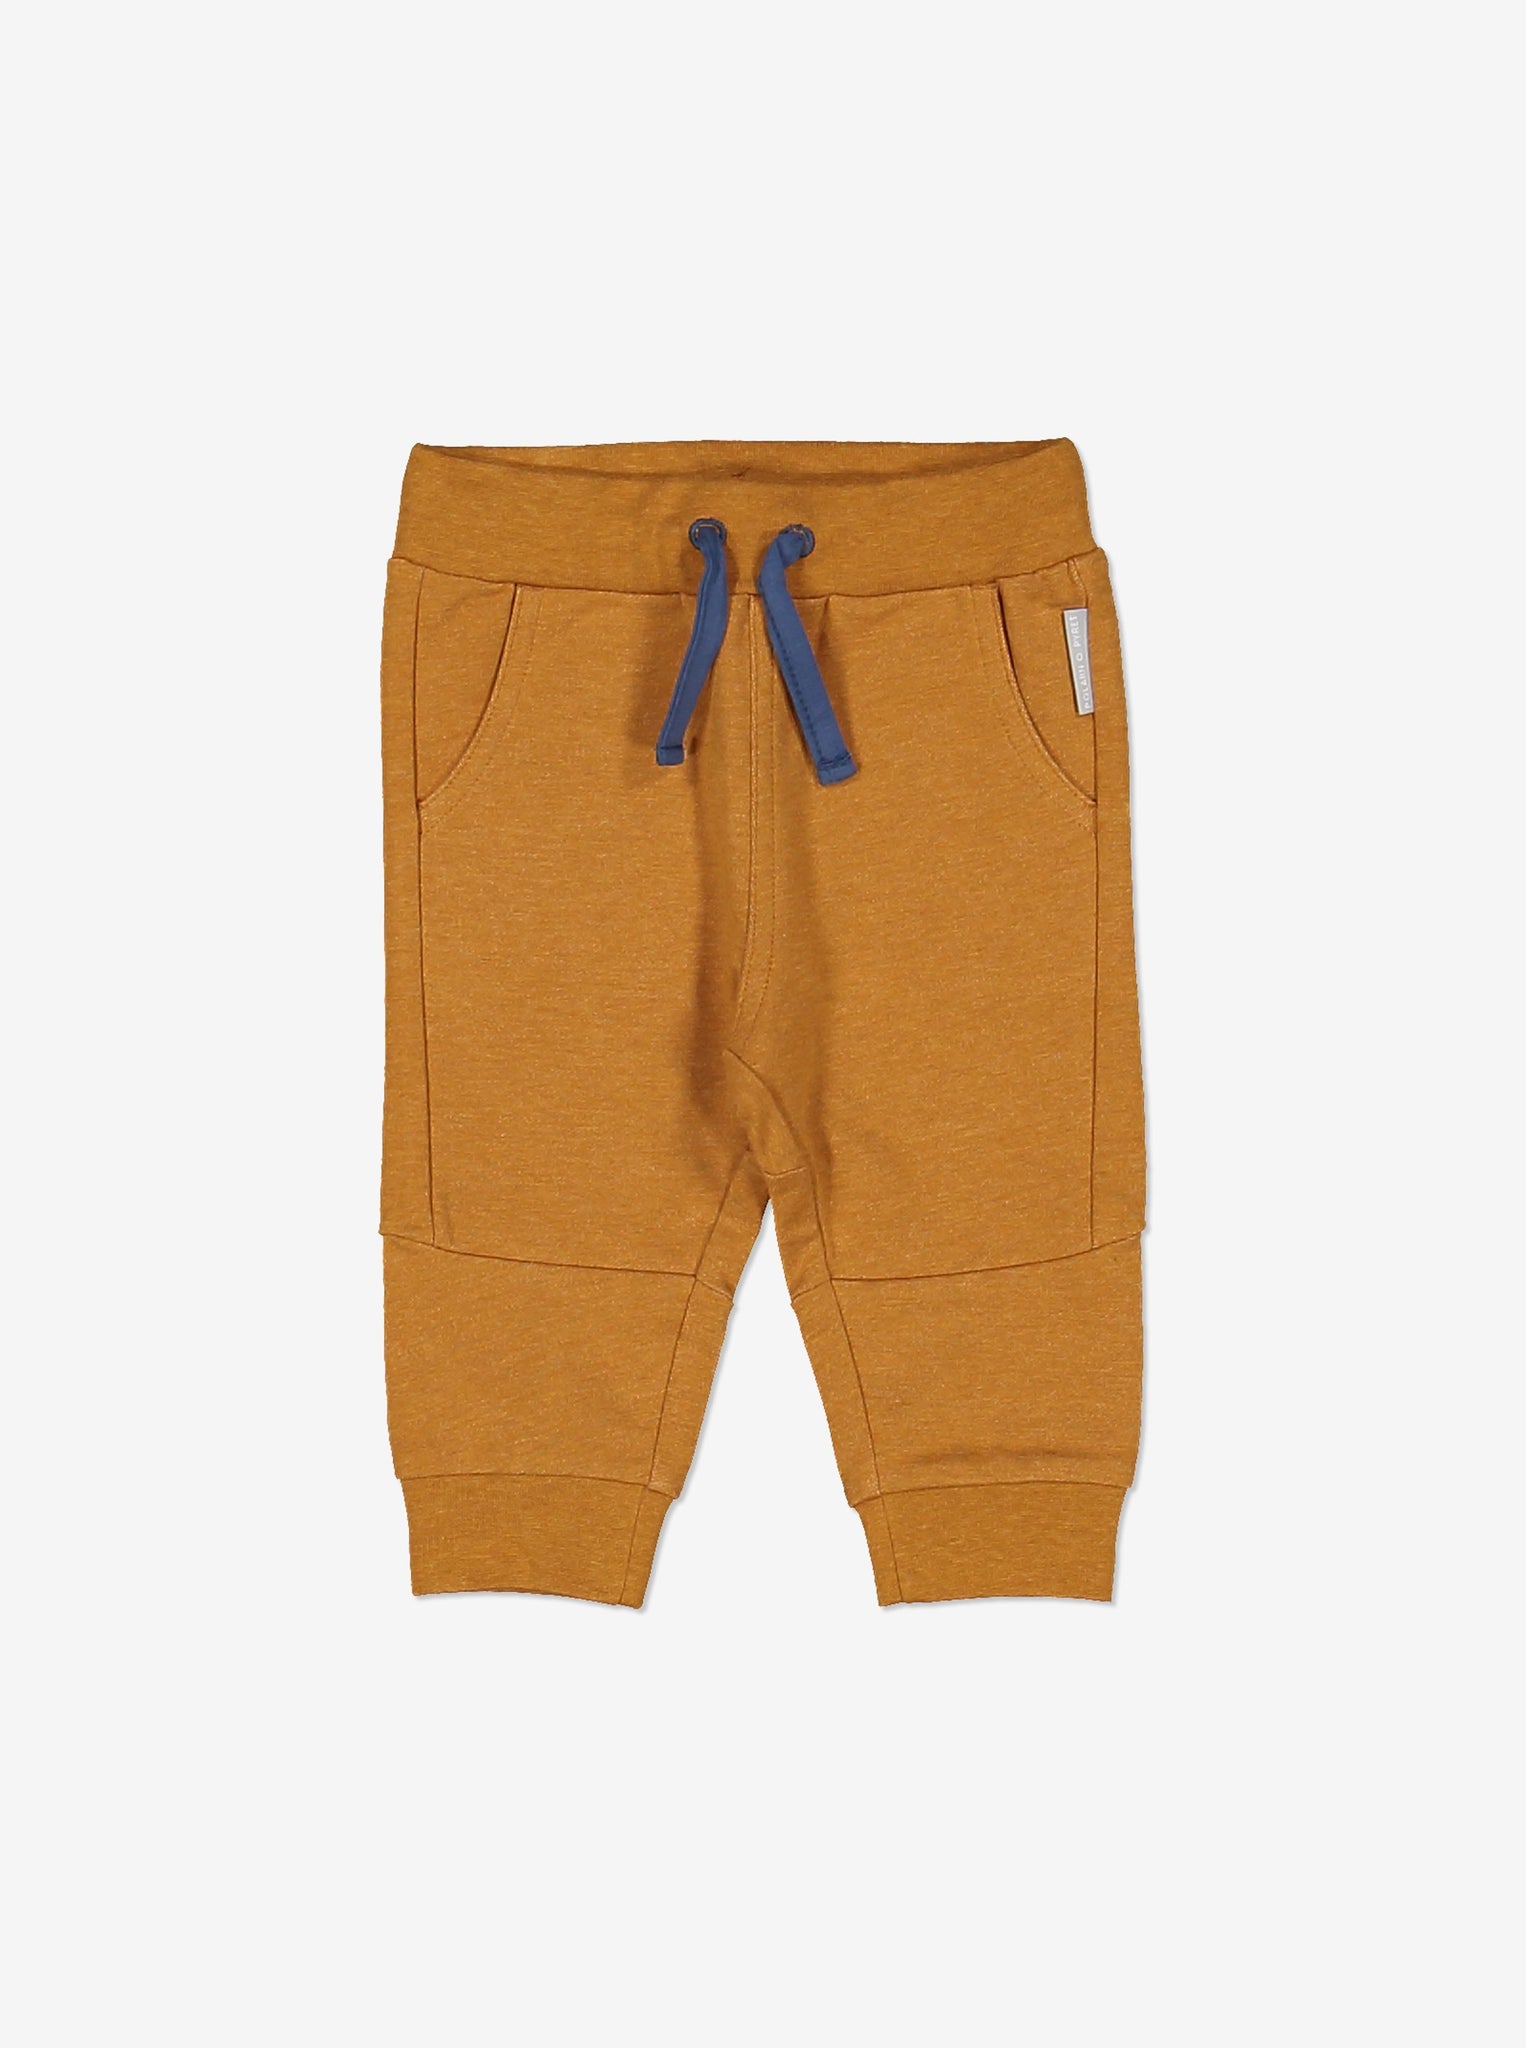 Soft brown baby leggings in soft GOTS organic cotton.  With contrast draw sting waist, two front pockets and ribbed cuffs to keep them in place.